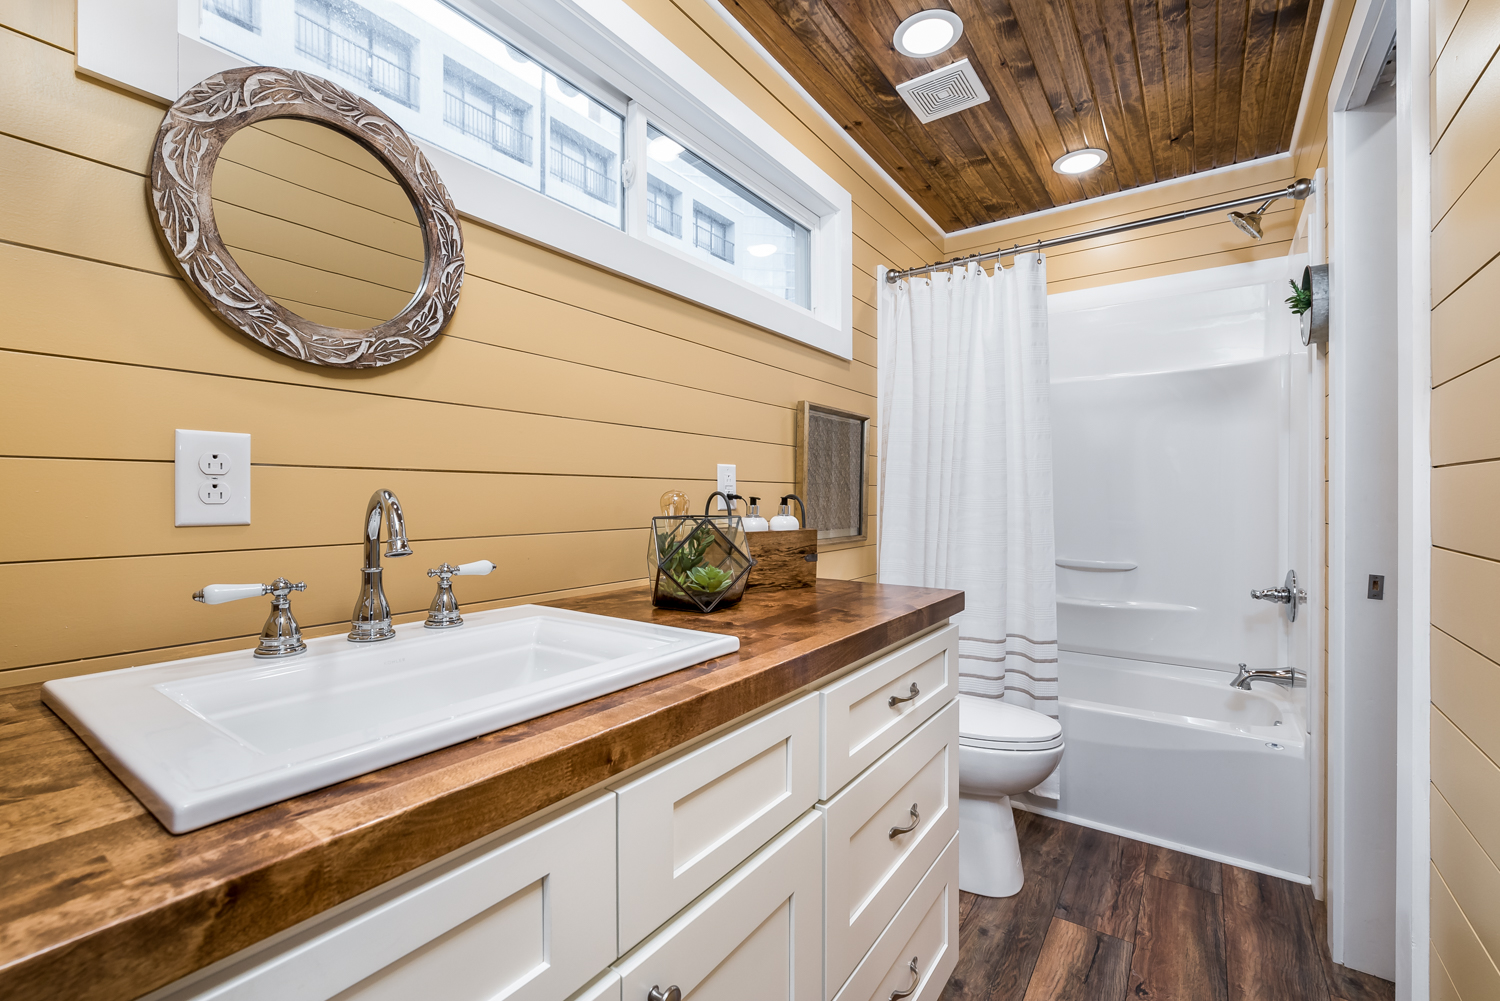 Bathroom with wood panel walls, white bathtub, shower, sink, and cabinetry